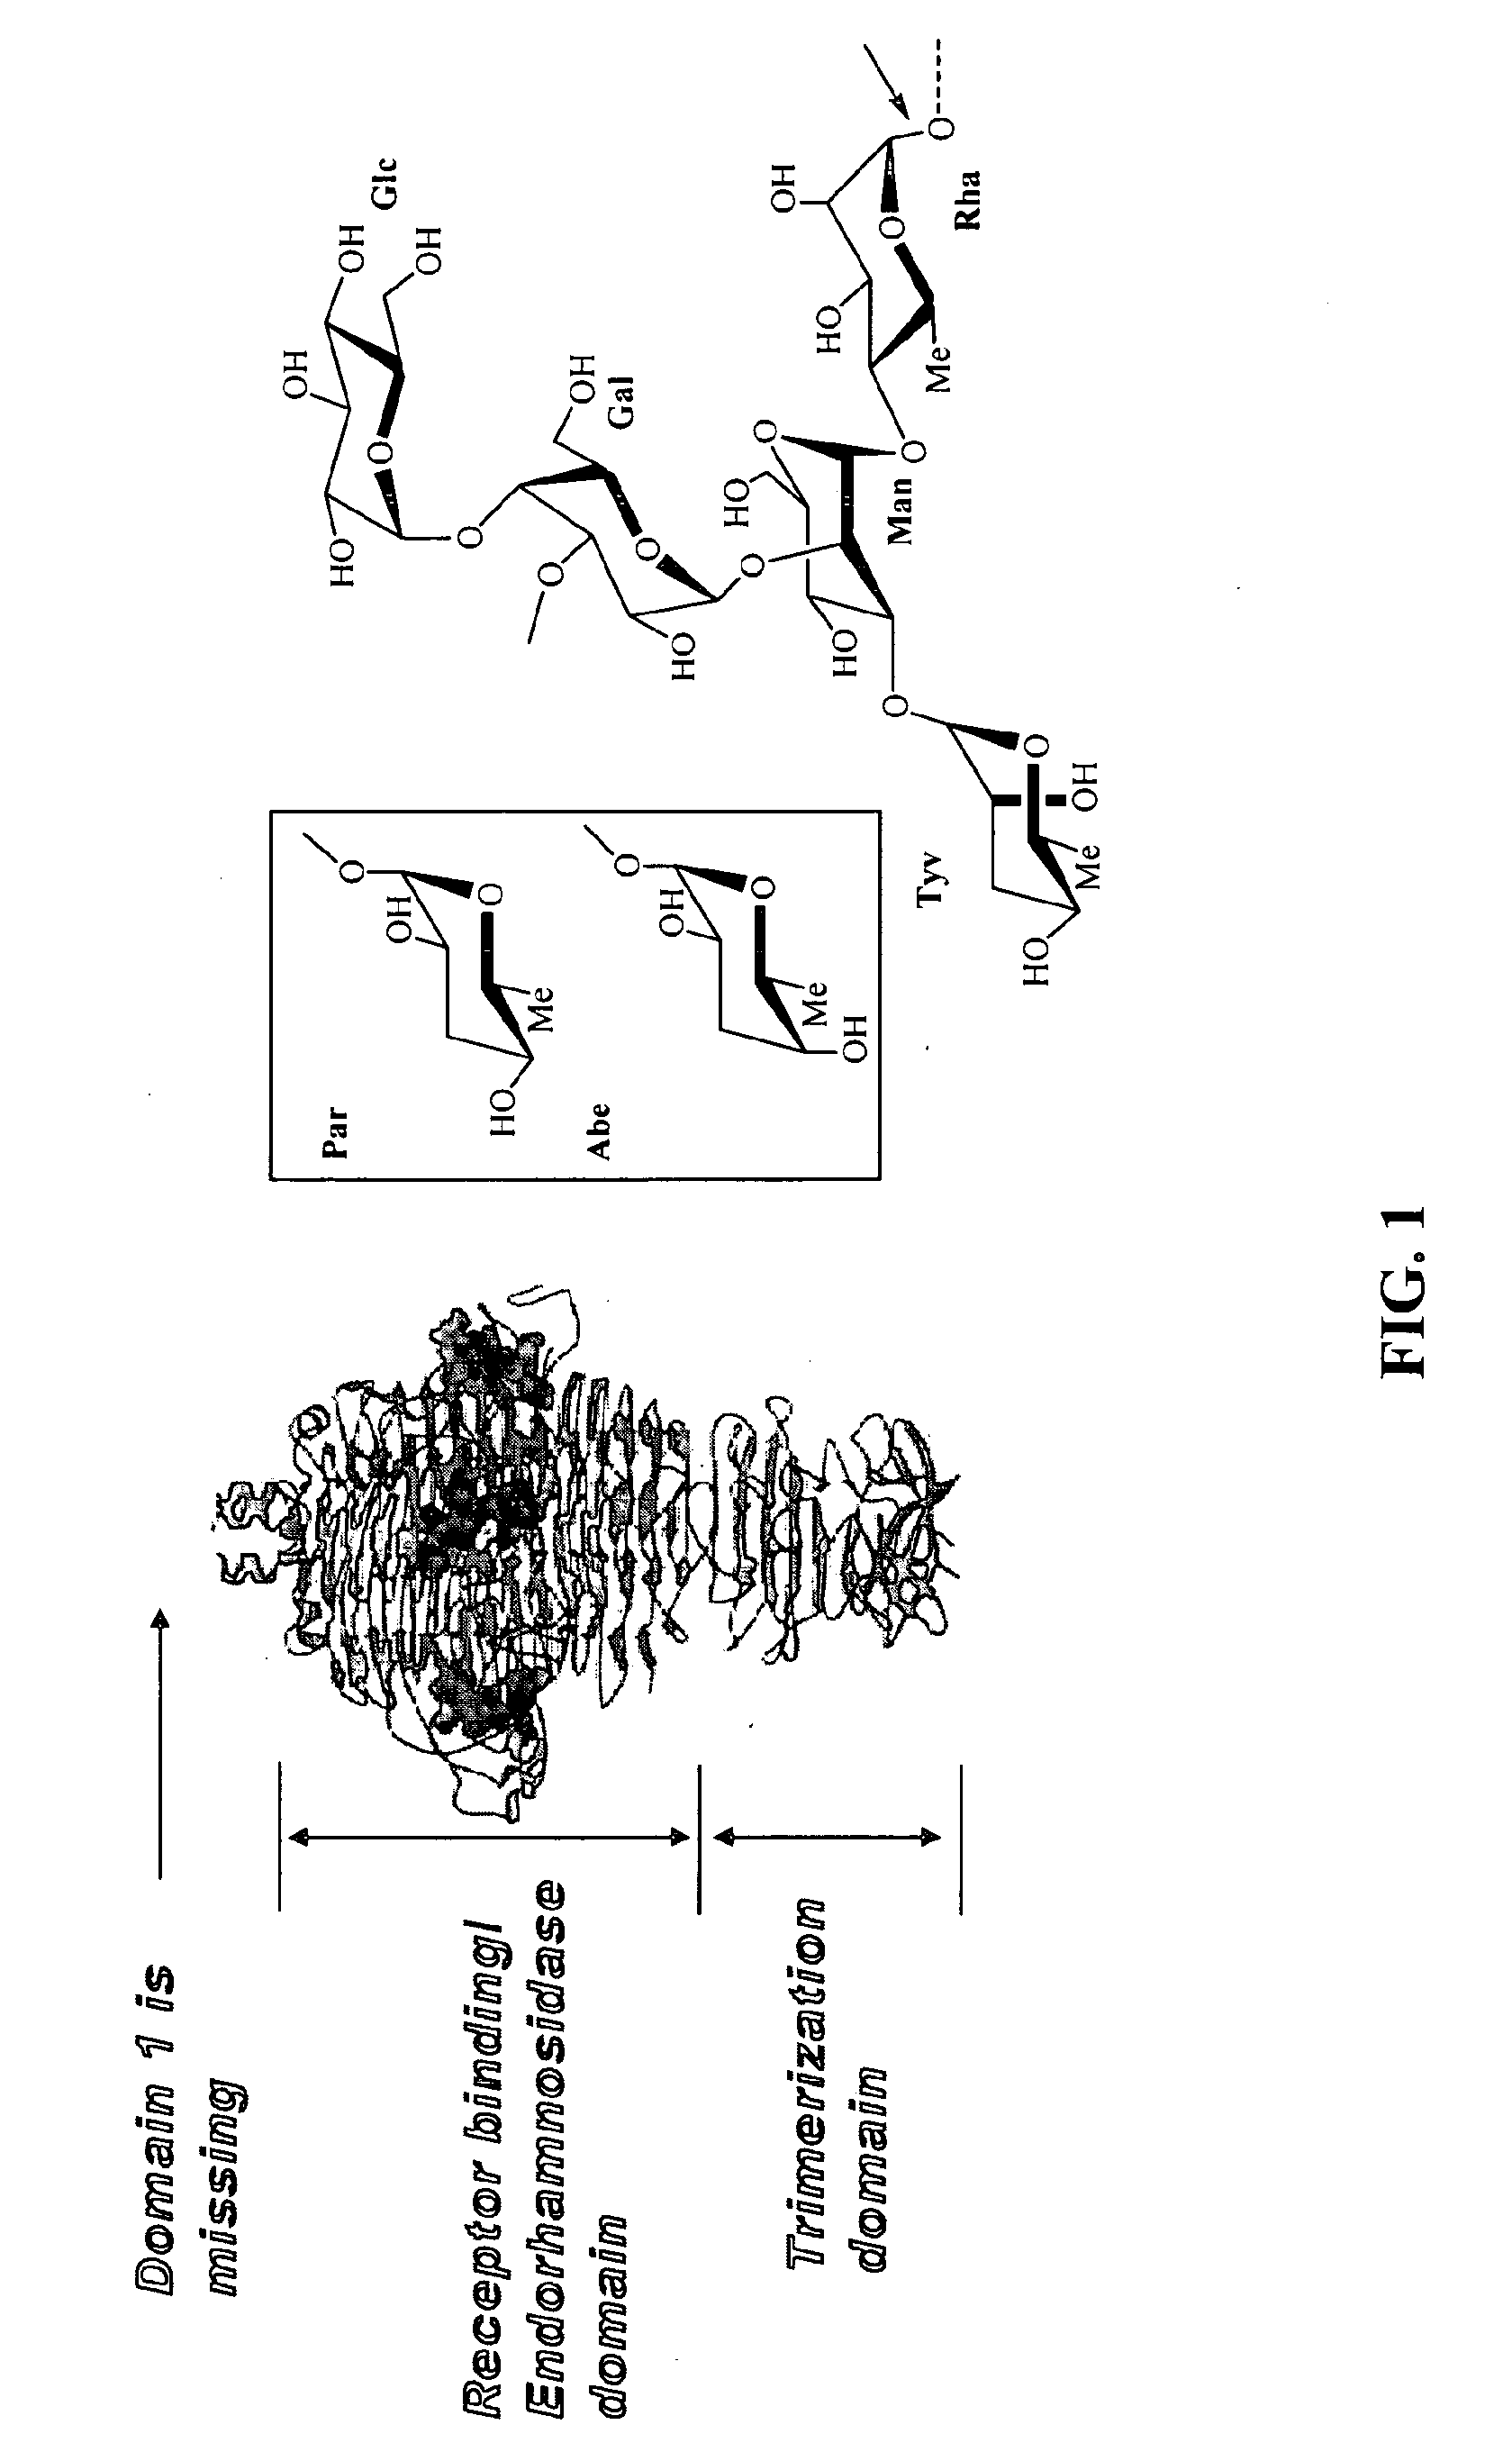 Phage receptor binding proteins for antibacterial therapy and other novel uses